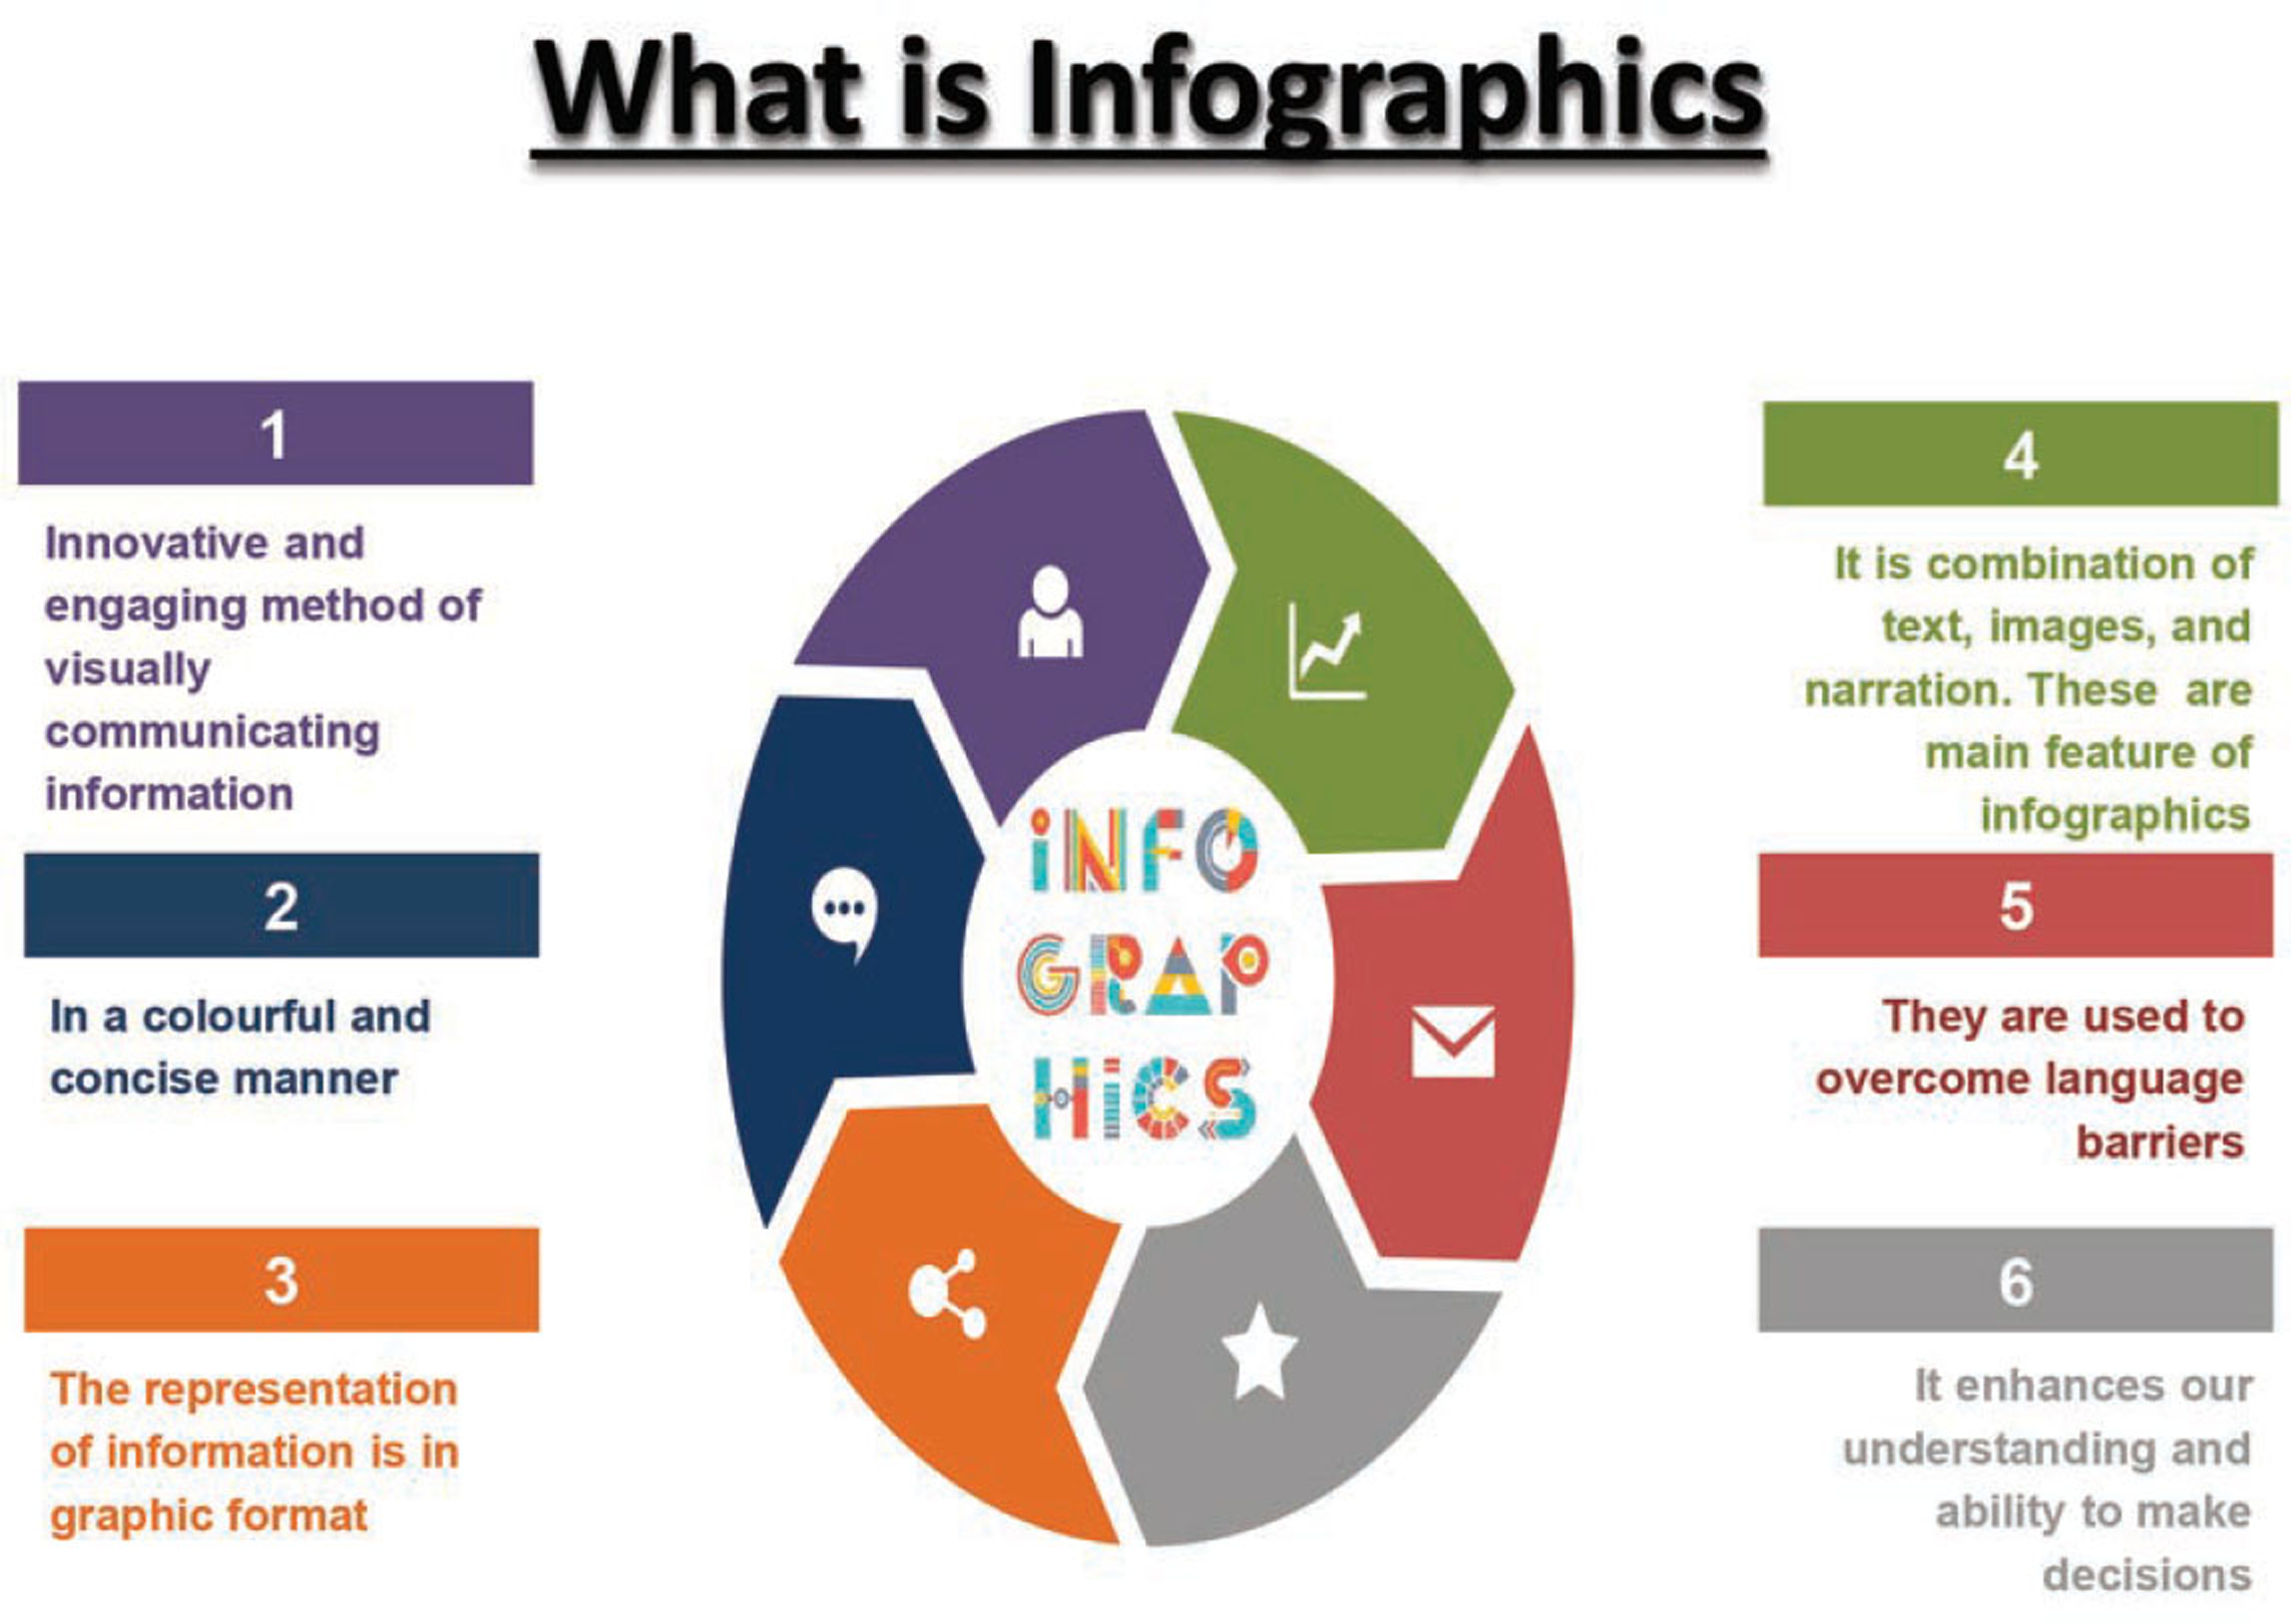 What is infographics?